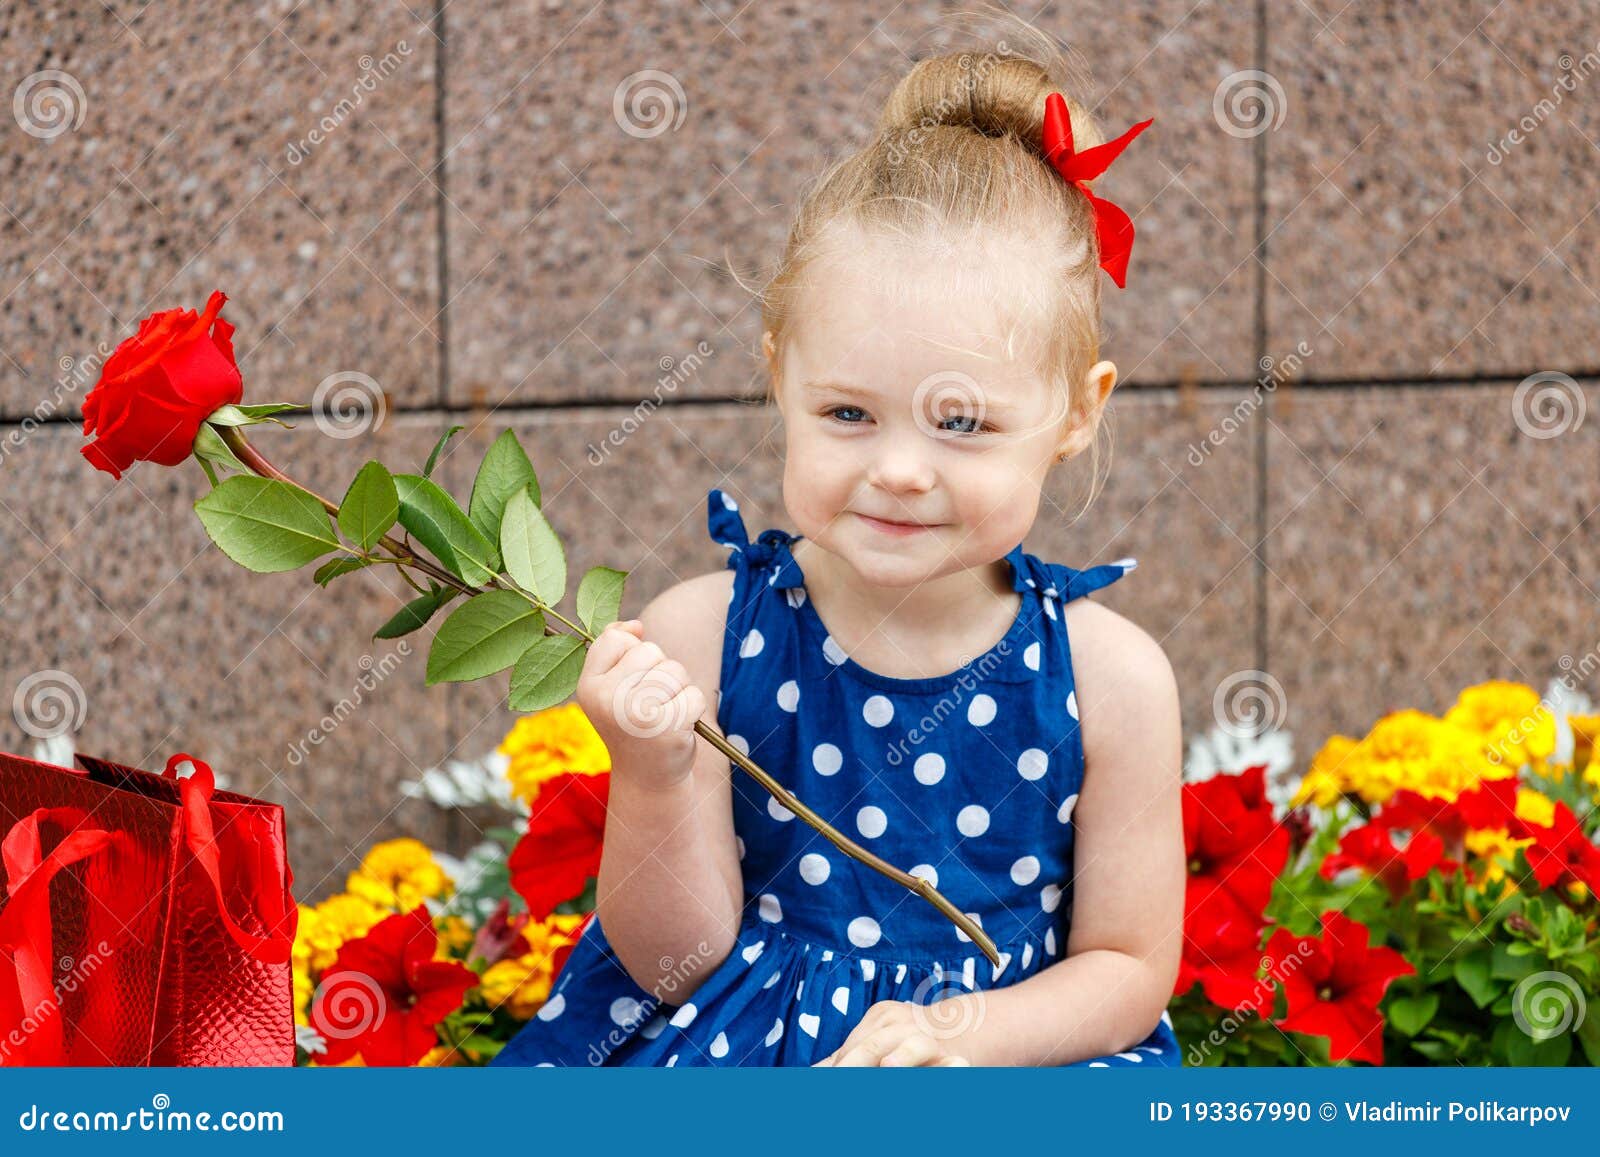 A Little Girl in a Blue Dress and a Red Bow Sits with Colored Bags on ...